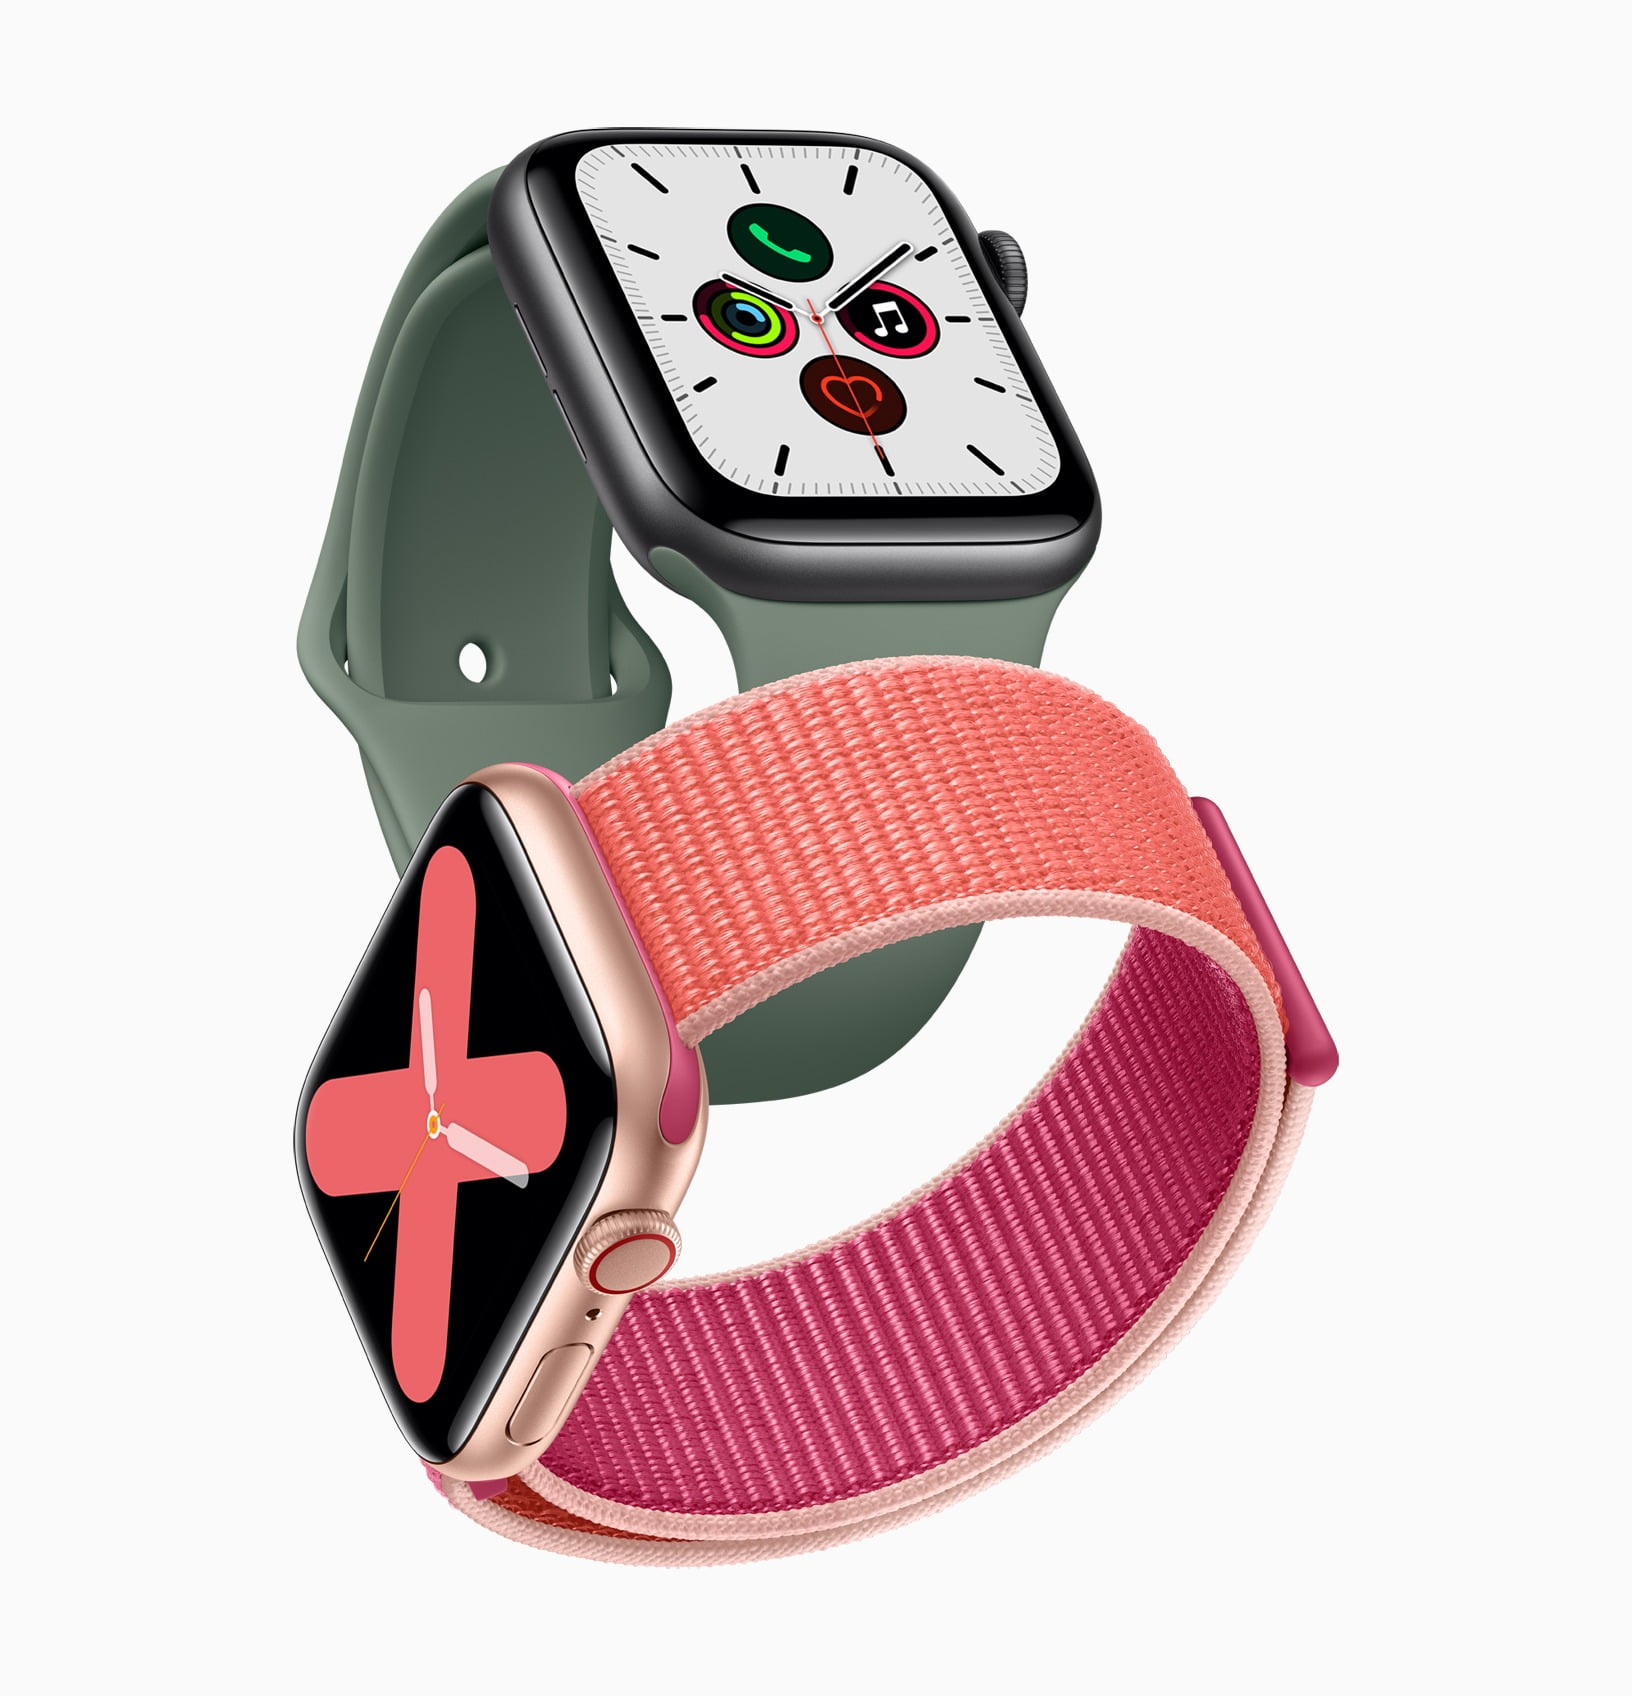 Apple watch series 5 gold aluminum case pomegranate band and space gray aluminum case pine green band